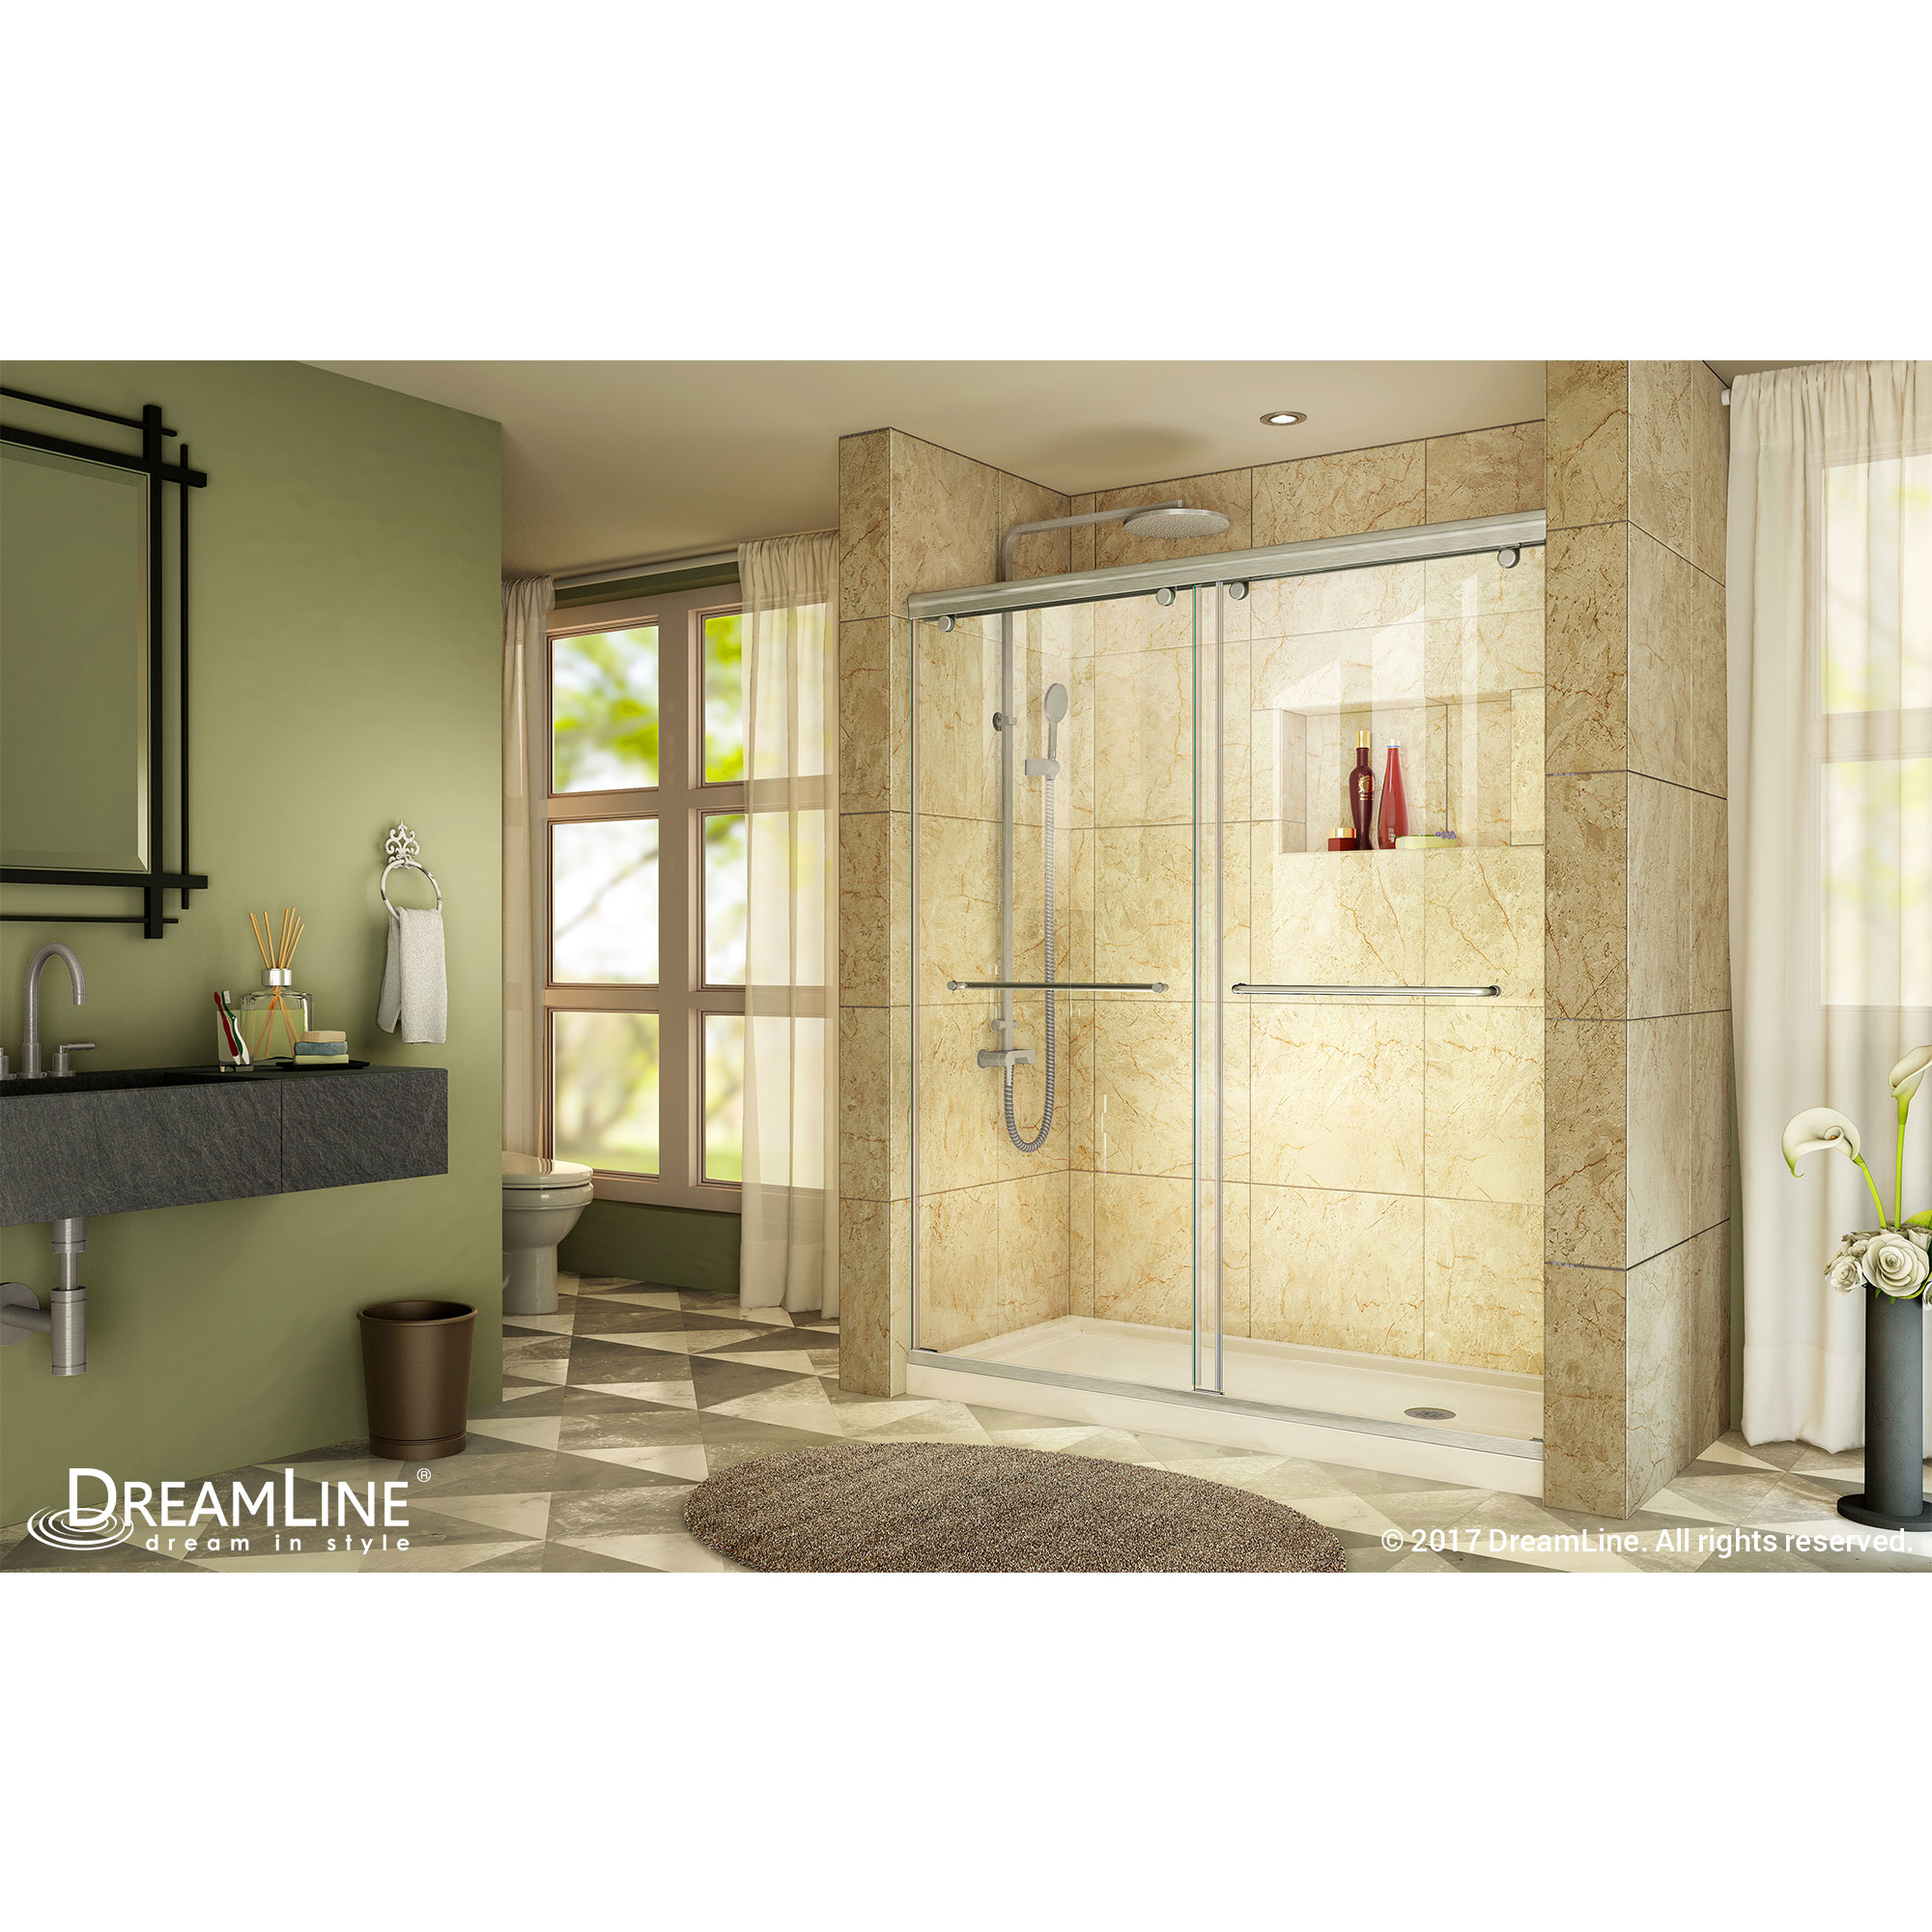 DreamLine Charisma 30 in. D x 60 in. W x 78 3/4 in. H Bypass Shower Door in Brushed Nickel with Right Drain Biscuit Base Kit